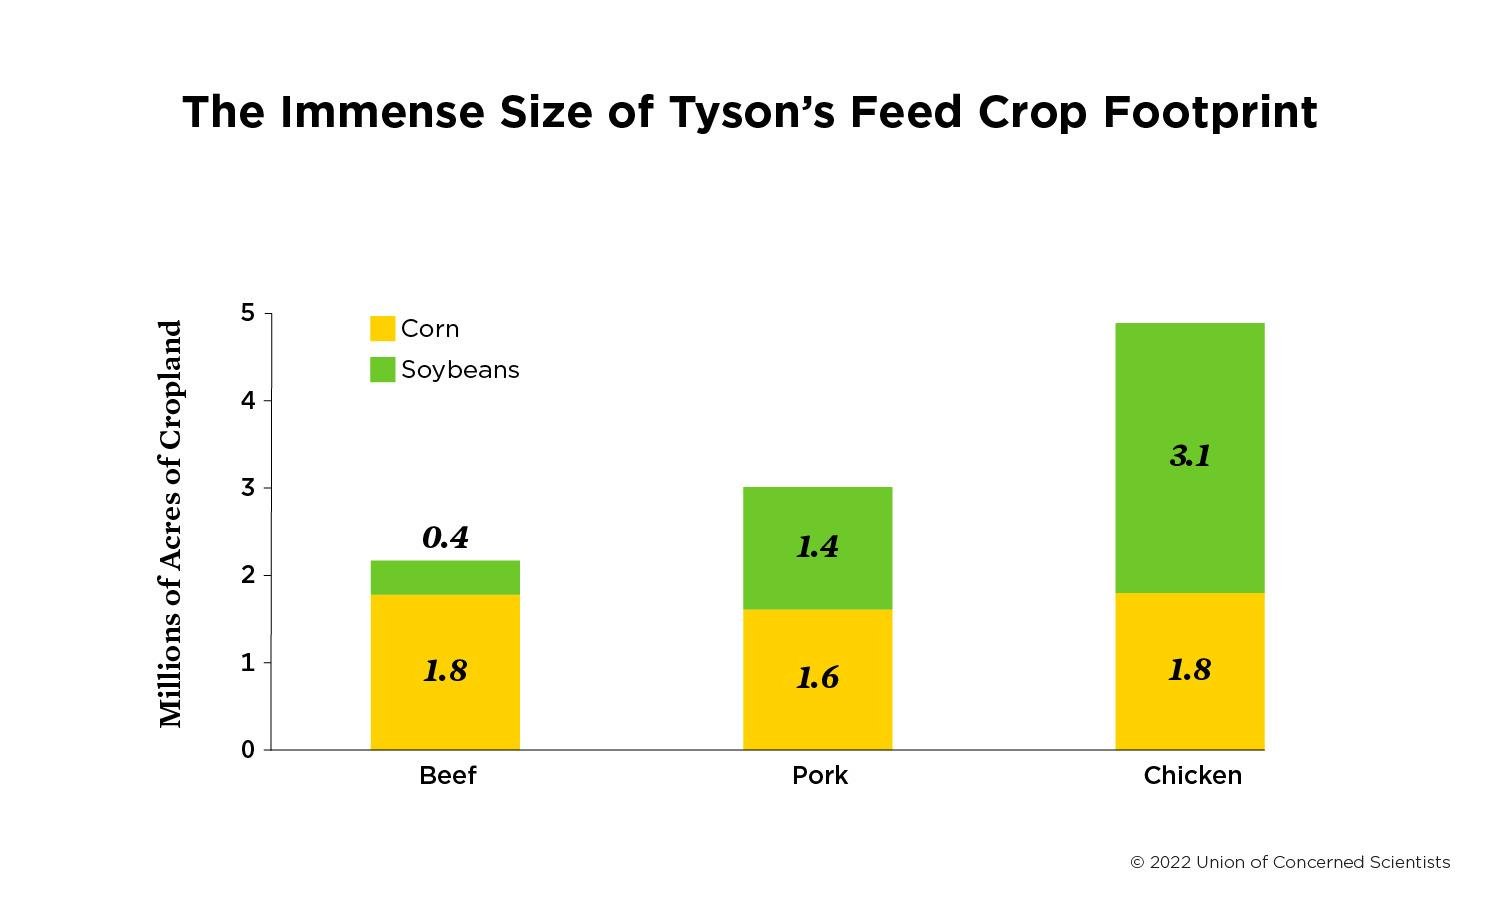 Bar graph showing how many millions of acres are dedicated to growing the corn and soybeans that go into the animal feed Tyson needs for its beef, pork, and chicken products